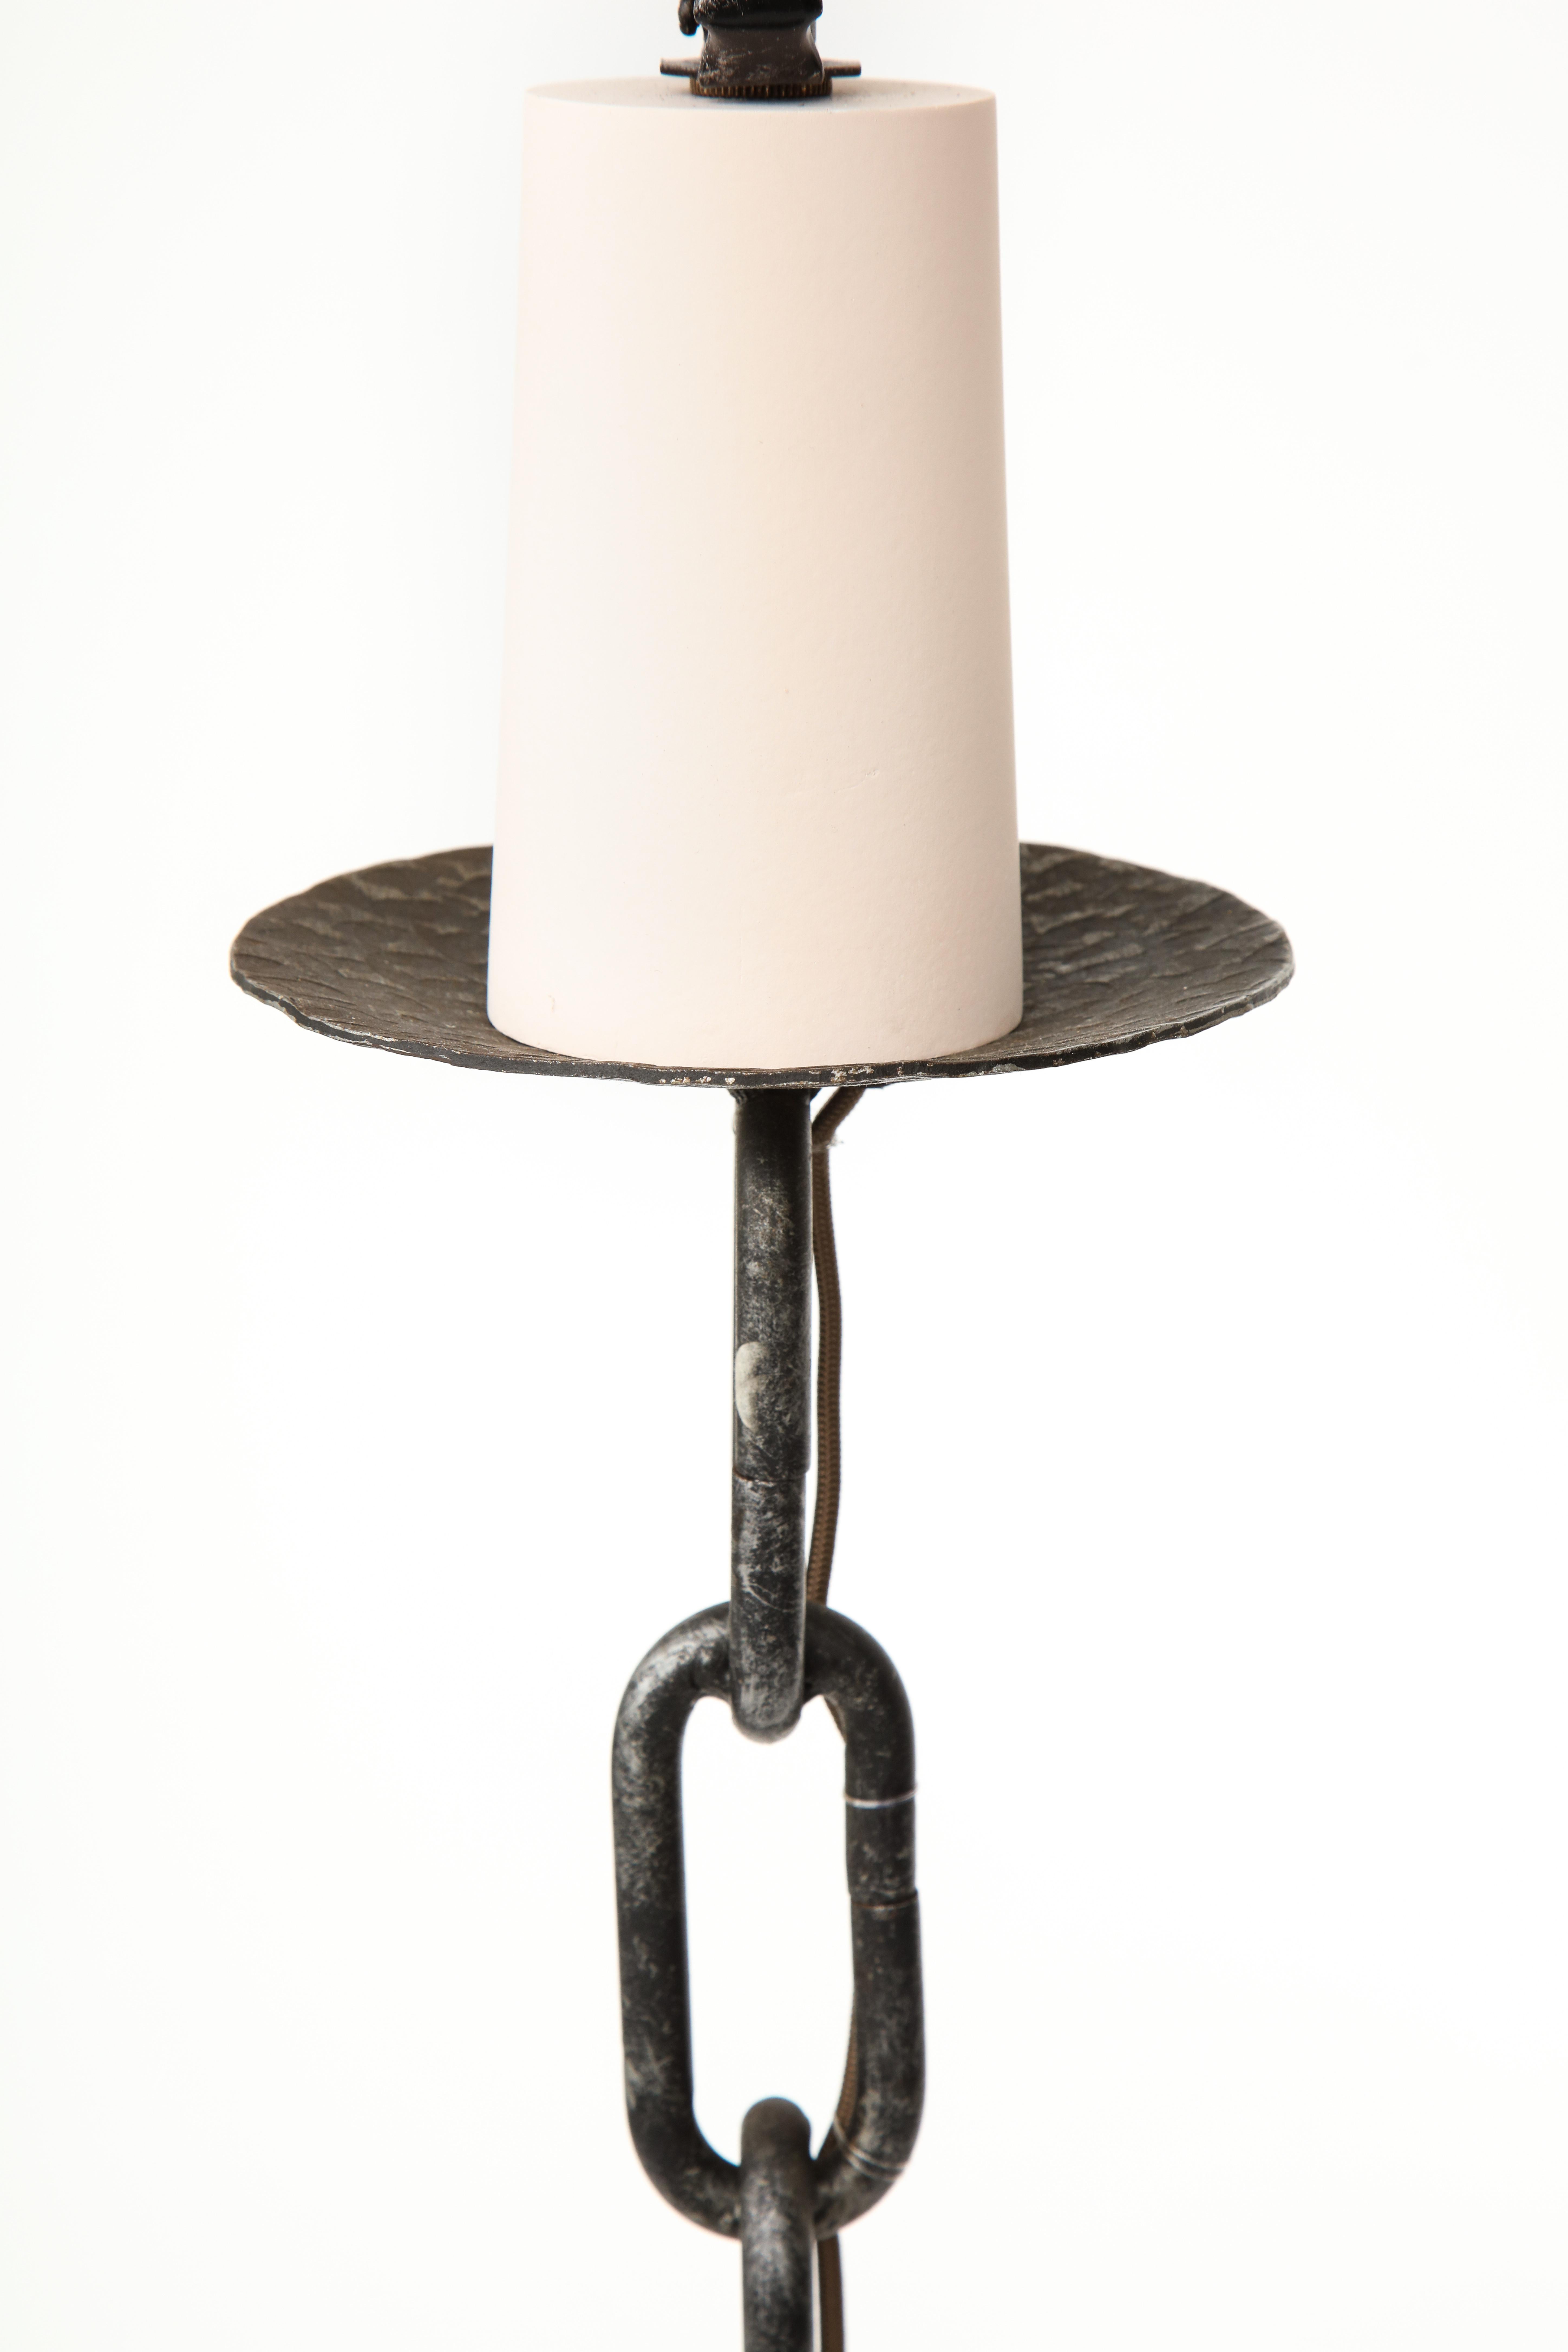 Wrought Iron Floor Lamps, Spain 1940's For Sale 7